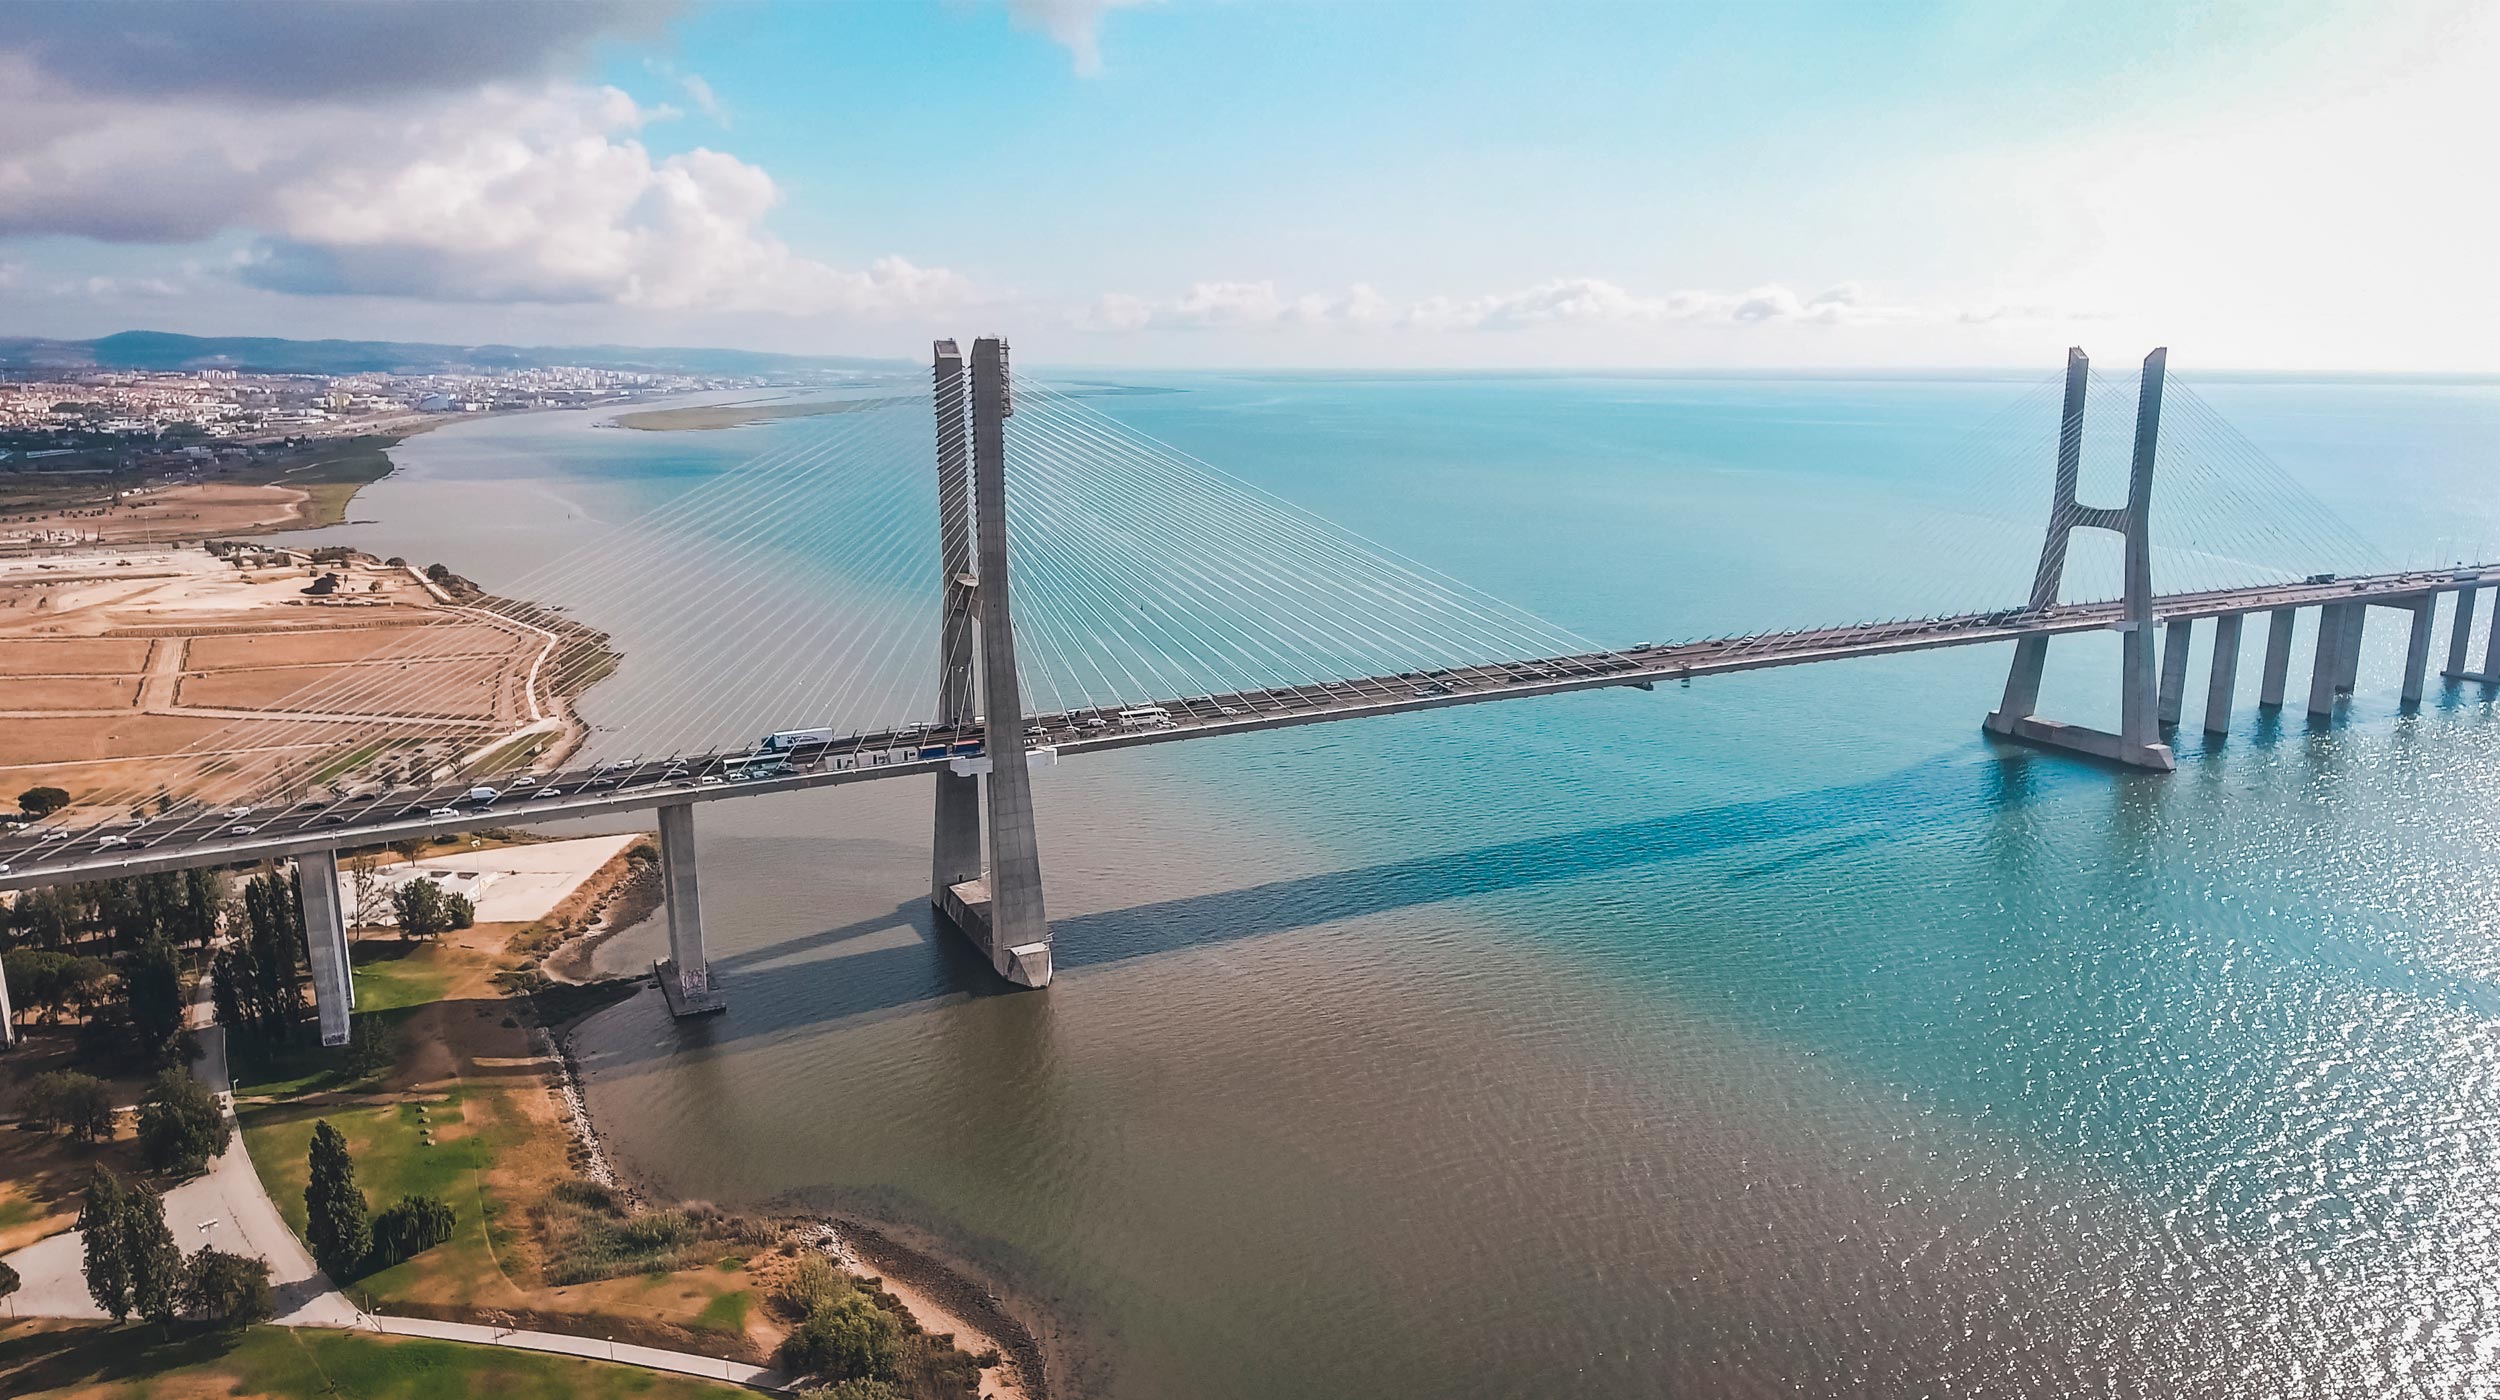 The Vasco da Gama Bridge is a cable-stayed bridge over the Tagus River connecting the municipality of Alcochete with Lisbon, Portugal. At over 17.3 km, it is the second longest bridge in the European Union.